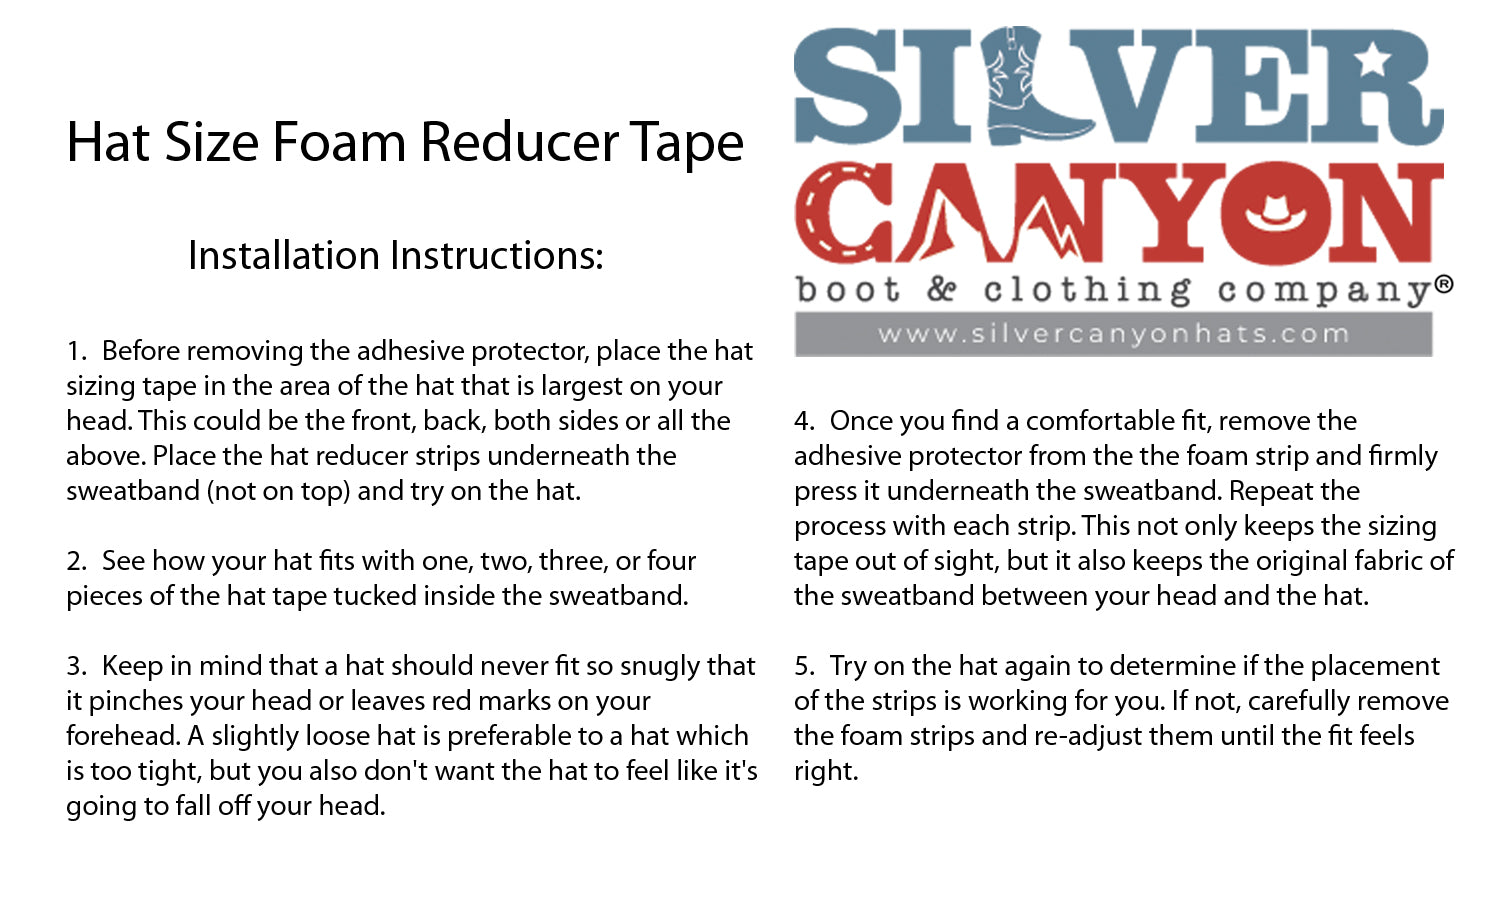 Hat Foam Size Reducer and Resizer Tape, 8-pack (4 Black, 4 White) by Silver Canyon for Cowboy Hats, Fedora, Helmets and Caps